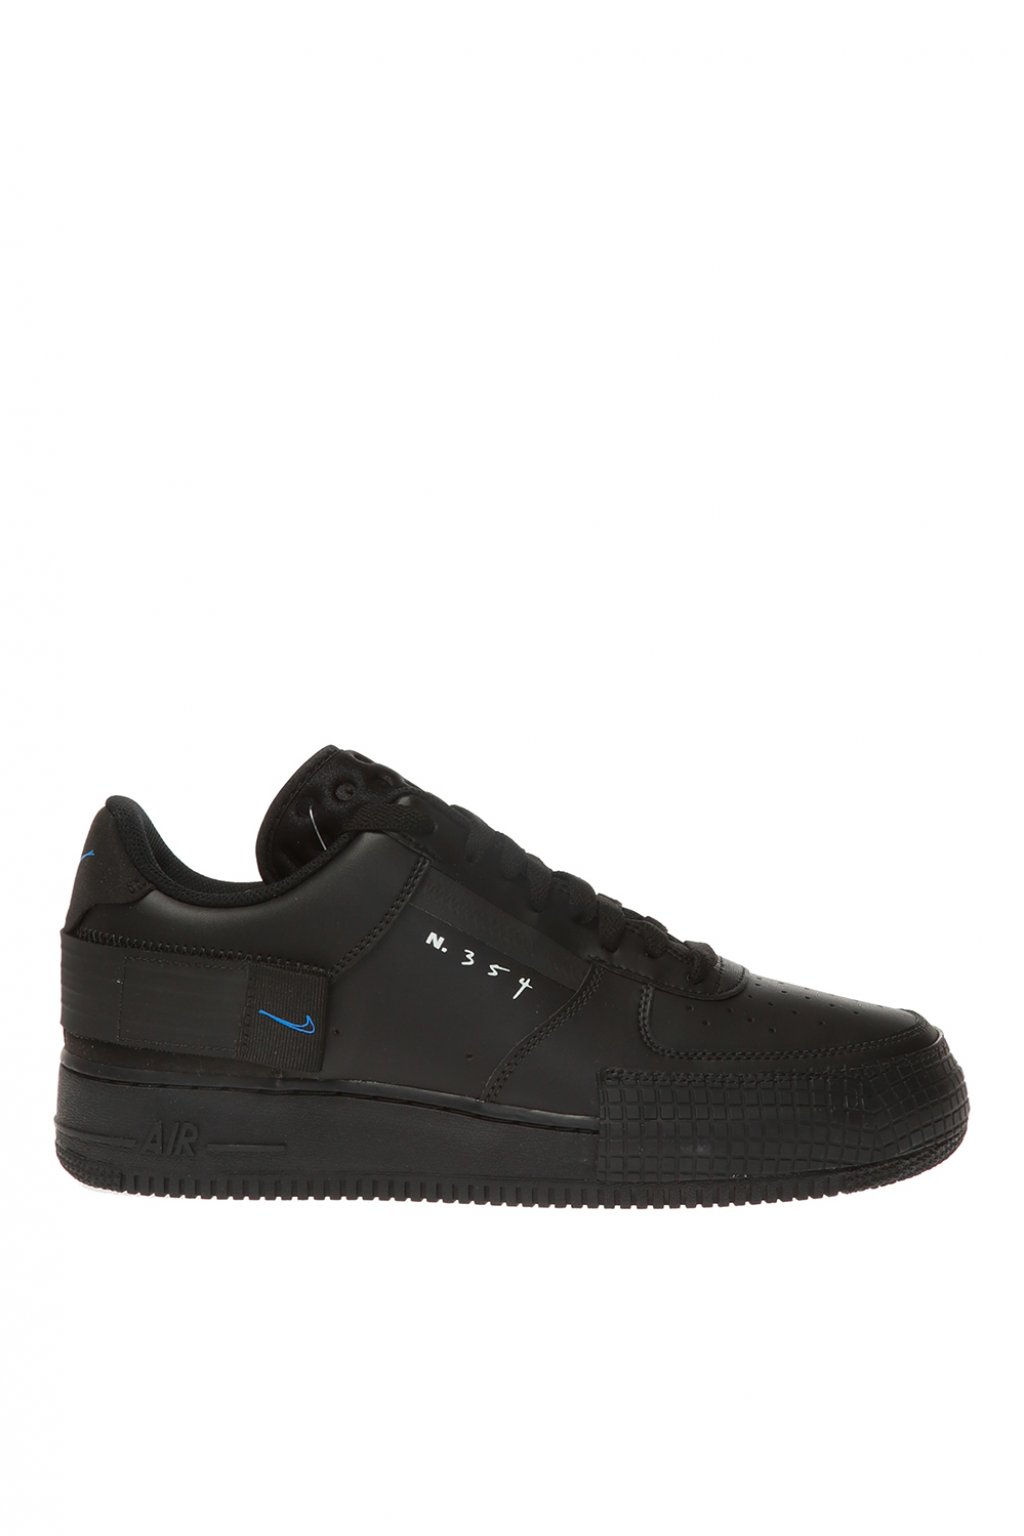 air force 1 type canada